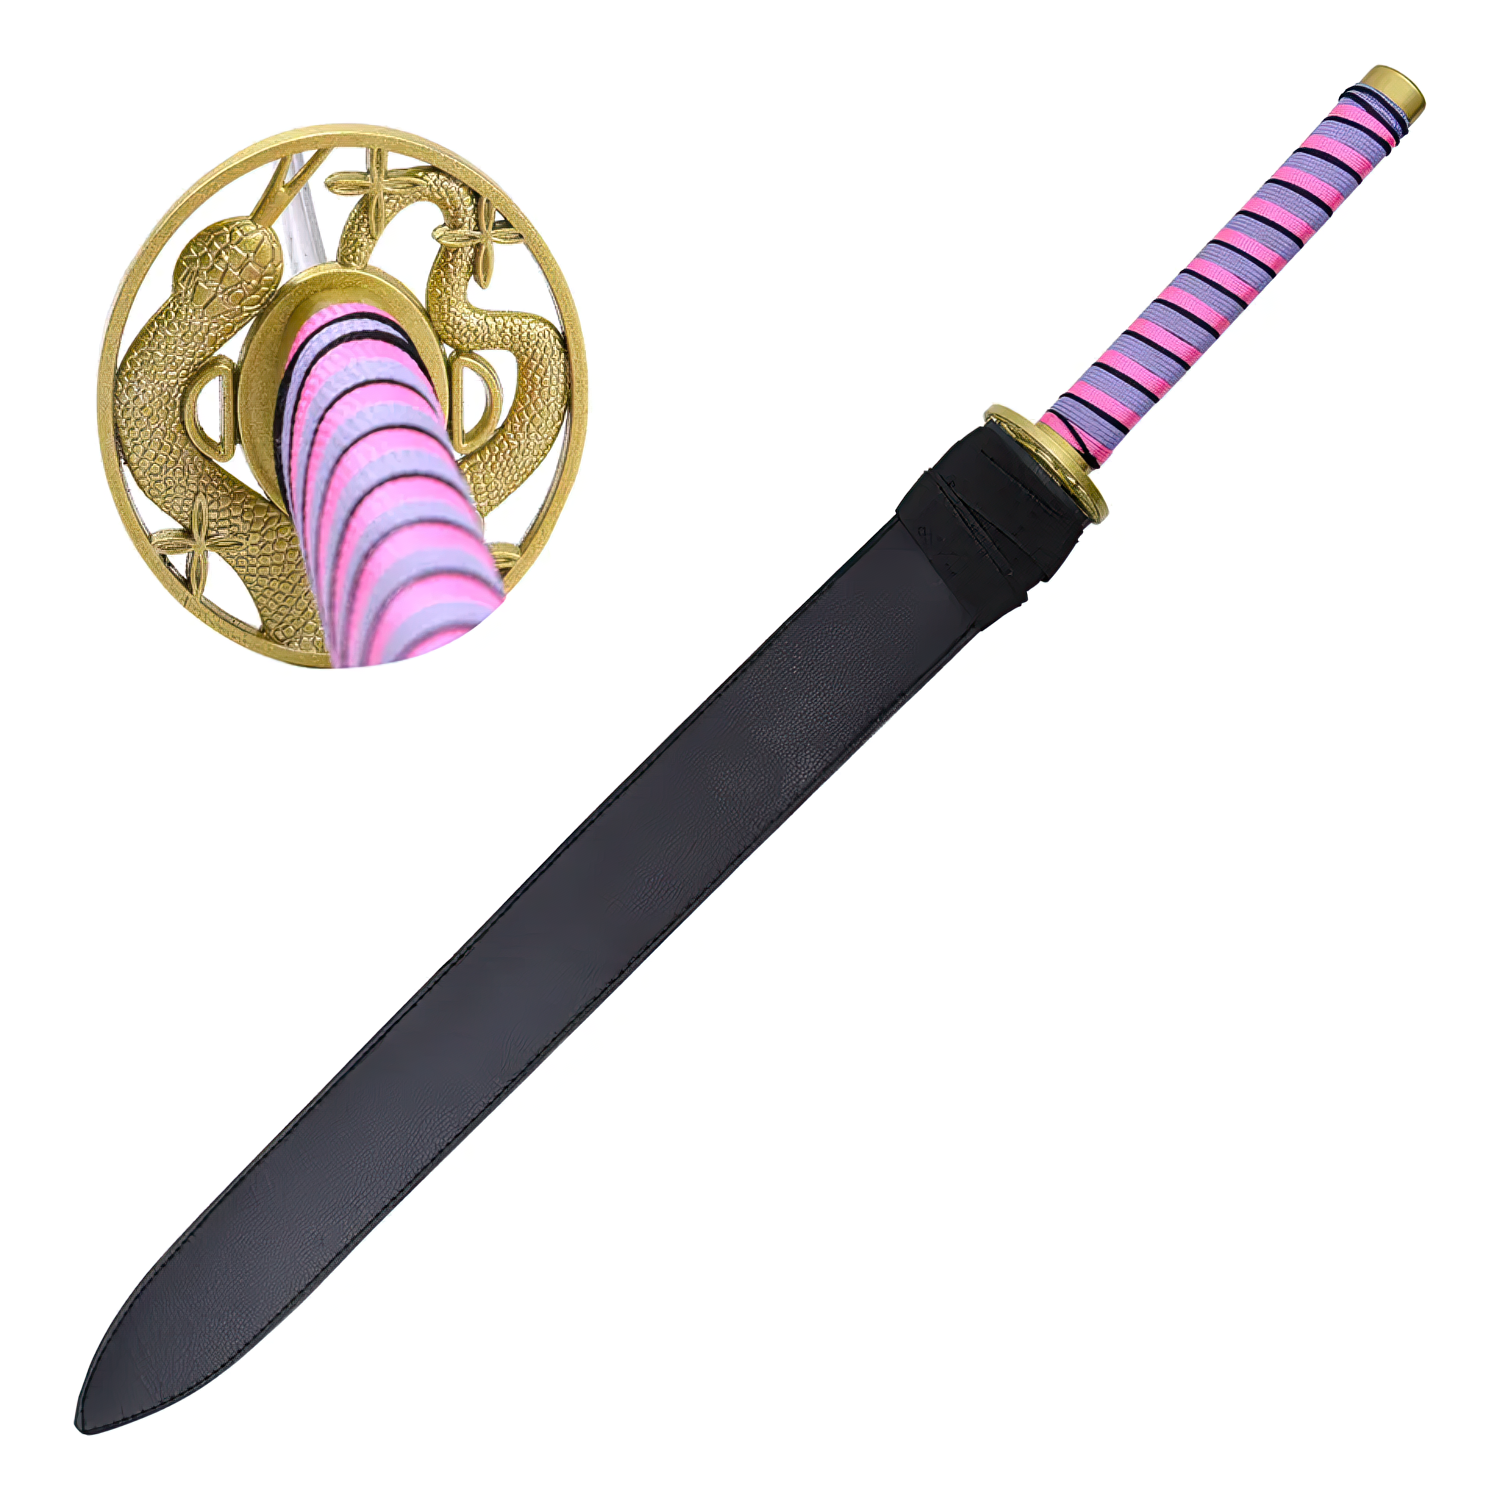 712 Anime Boy Sword Images, Stock Photos, 3D objects, & Vectors |  Shutterstock